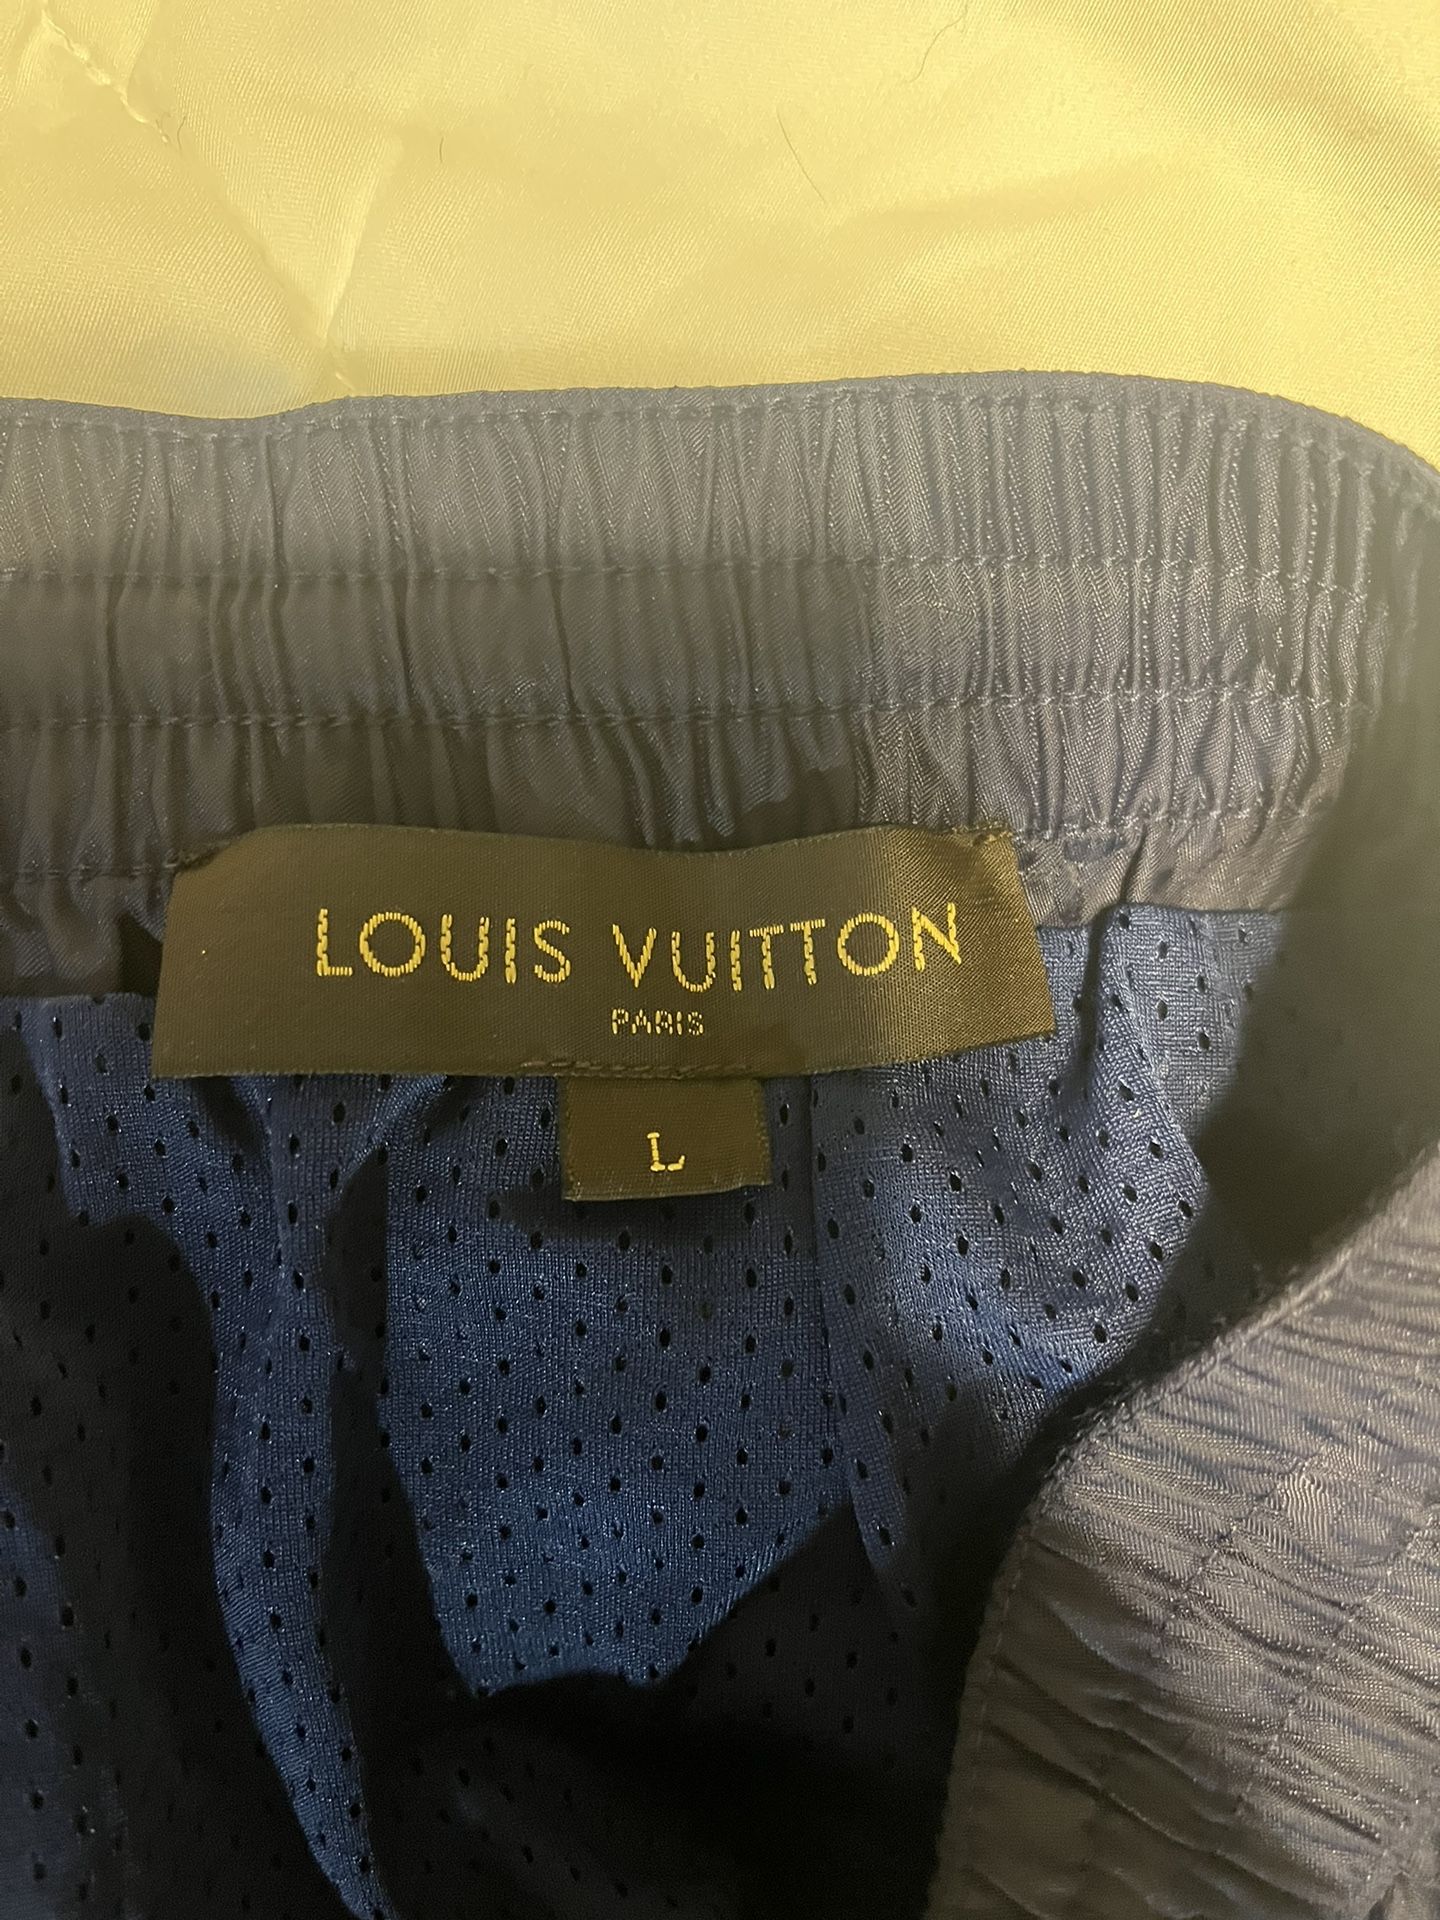 Lv Swim Trunks for Sale in Indianapolis, IN - OfferUp